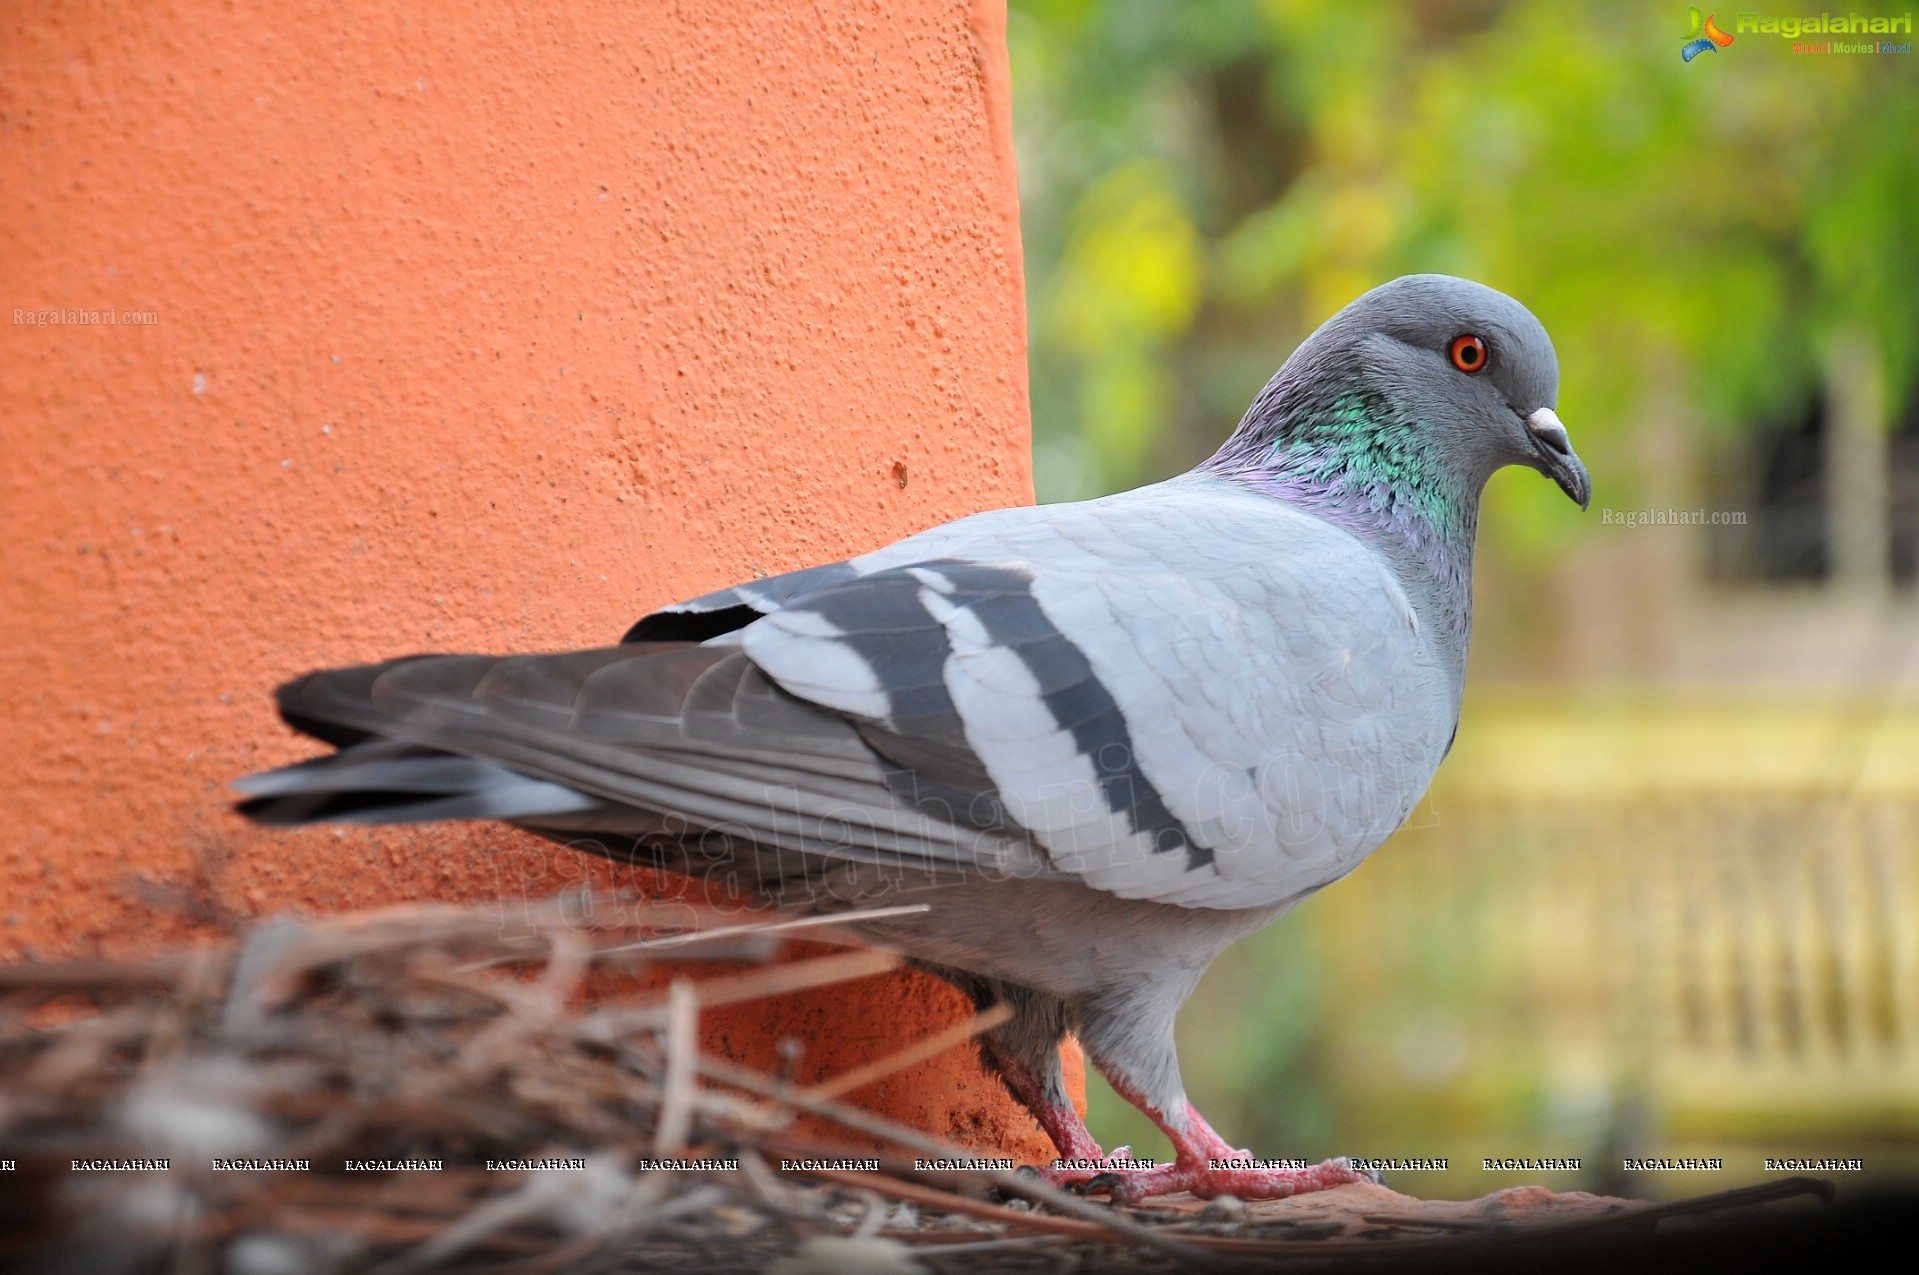 Pigeon with her Nestlings - Nikhil's Photography